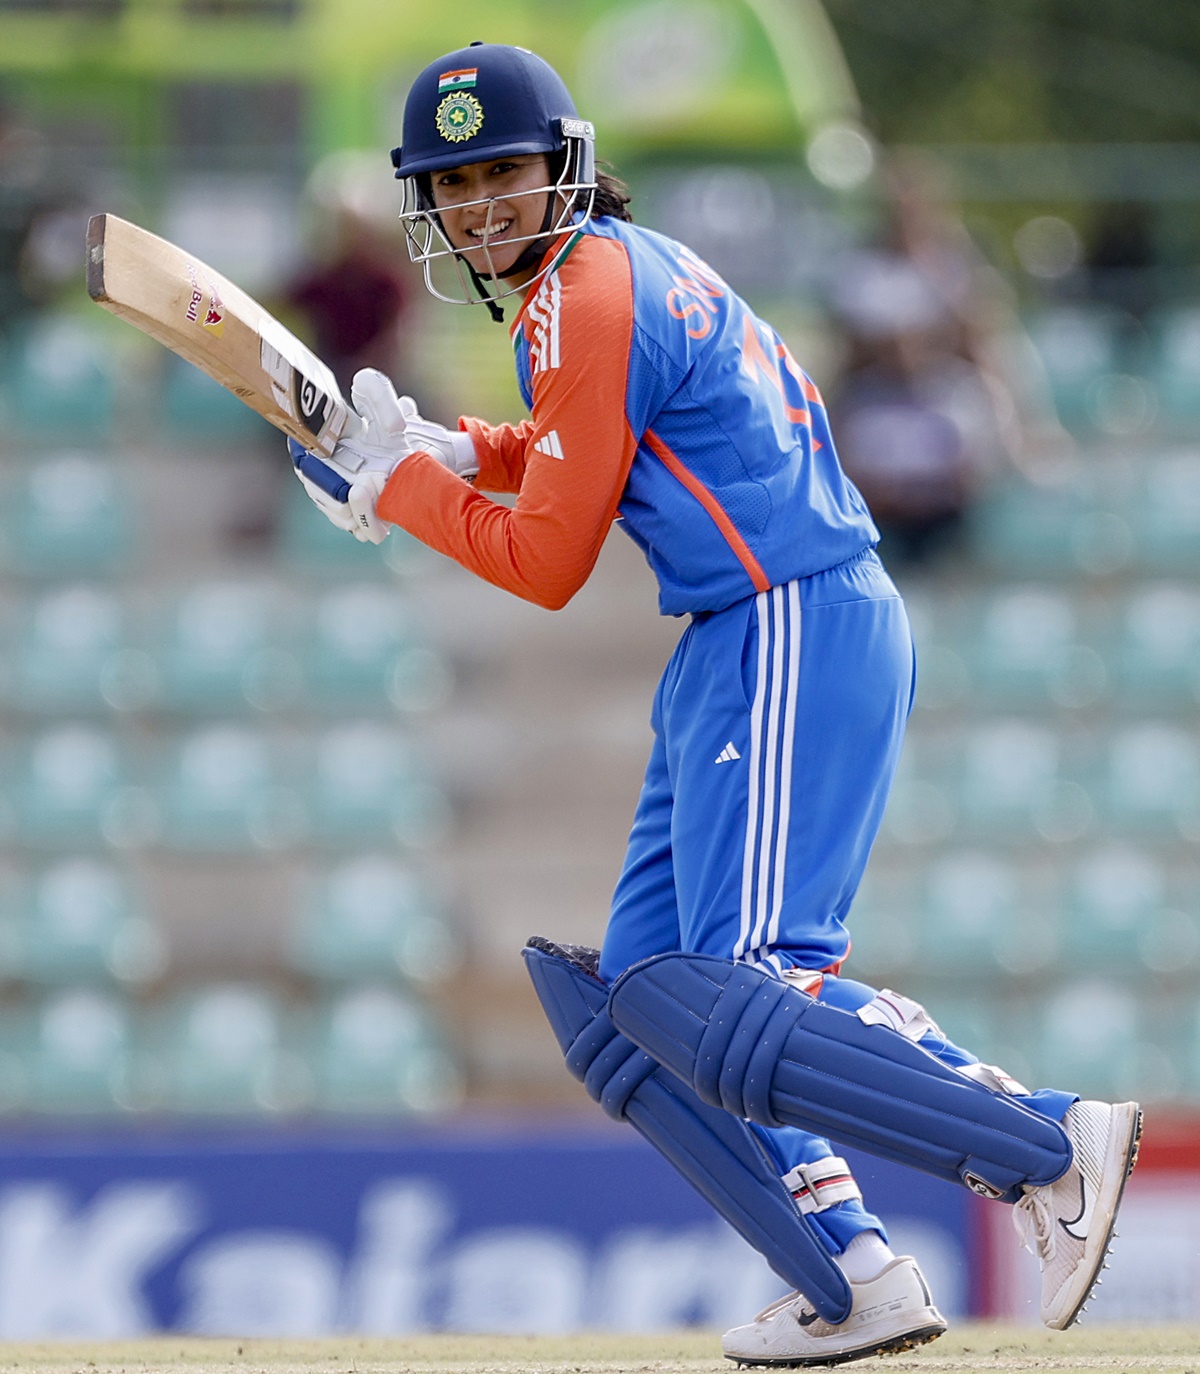 Smriti Mandhana's blazed away to an unbeaten 55 off 39 balls, which included 9 fours and a six.